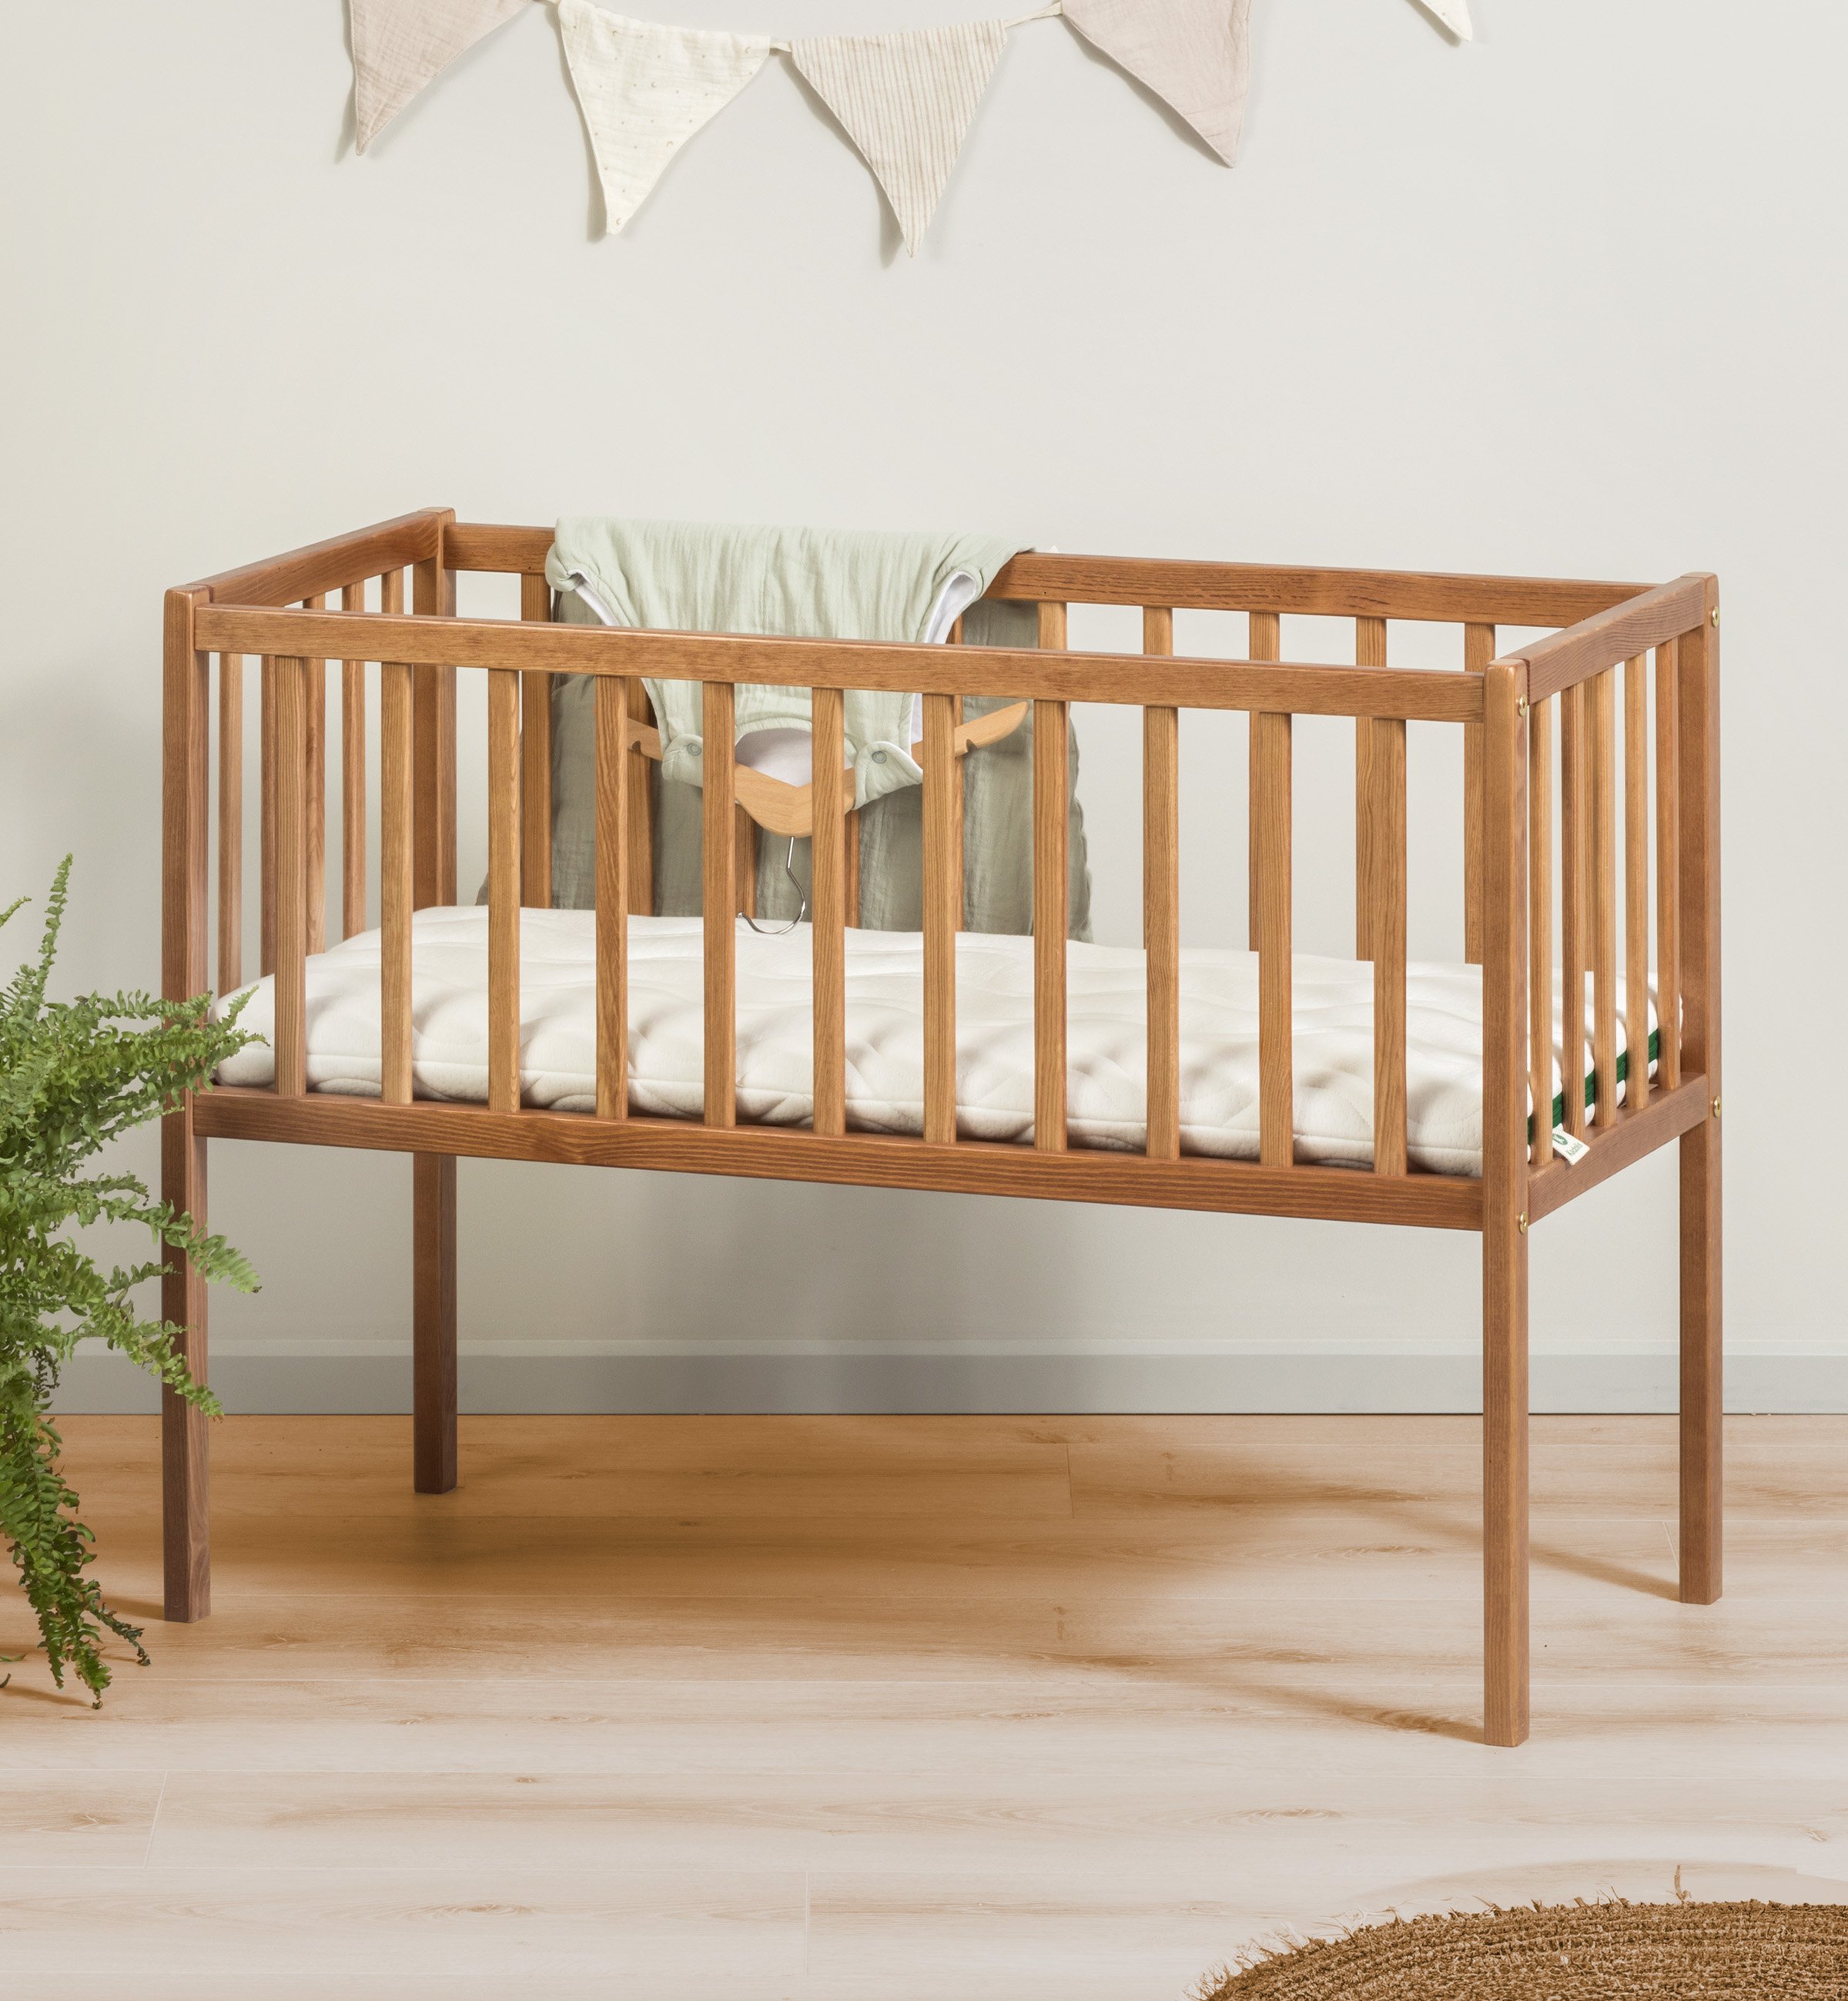 What size mattress should I choose for my baby?